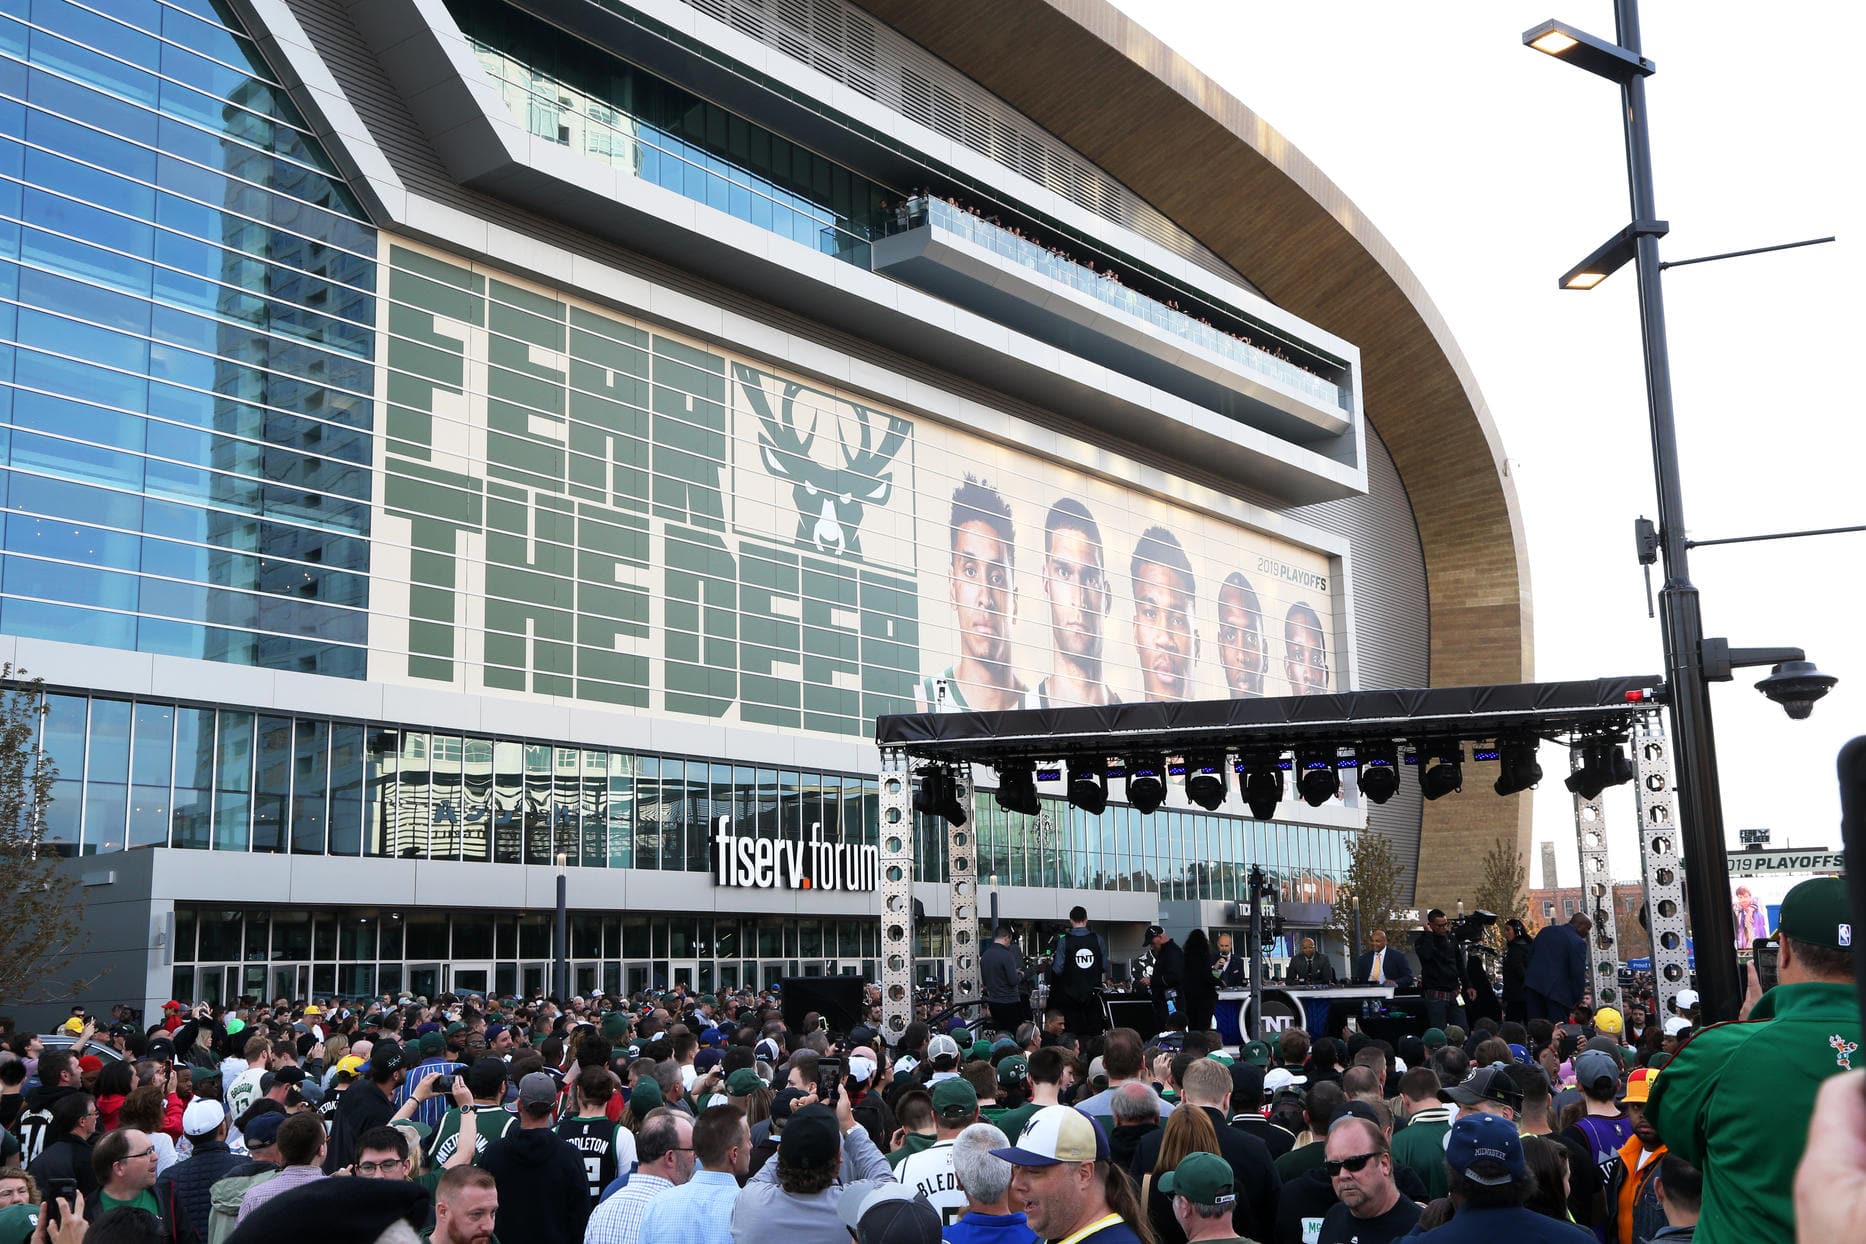 Inside The Nba Live From Deer District At Fiserv Forum